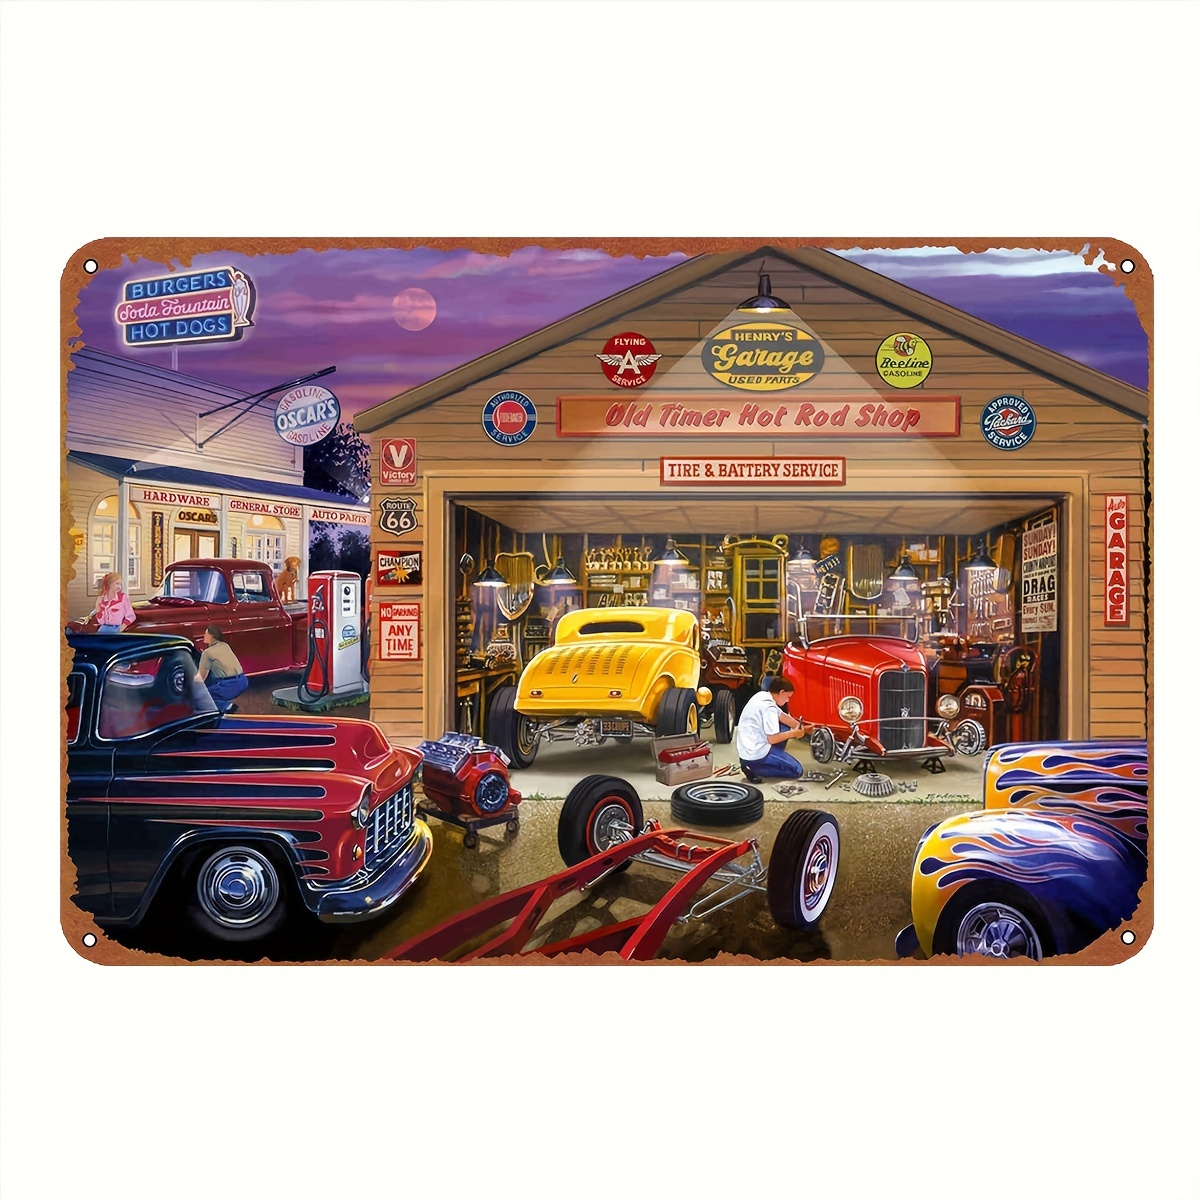 

Vintage Hot Rod Shop Tin Sign - Retro Metal Wall Art For Home Decor, 8x12 Inches